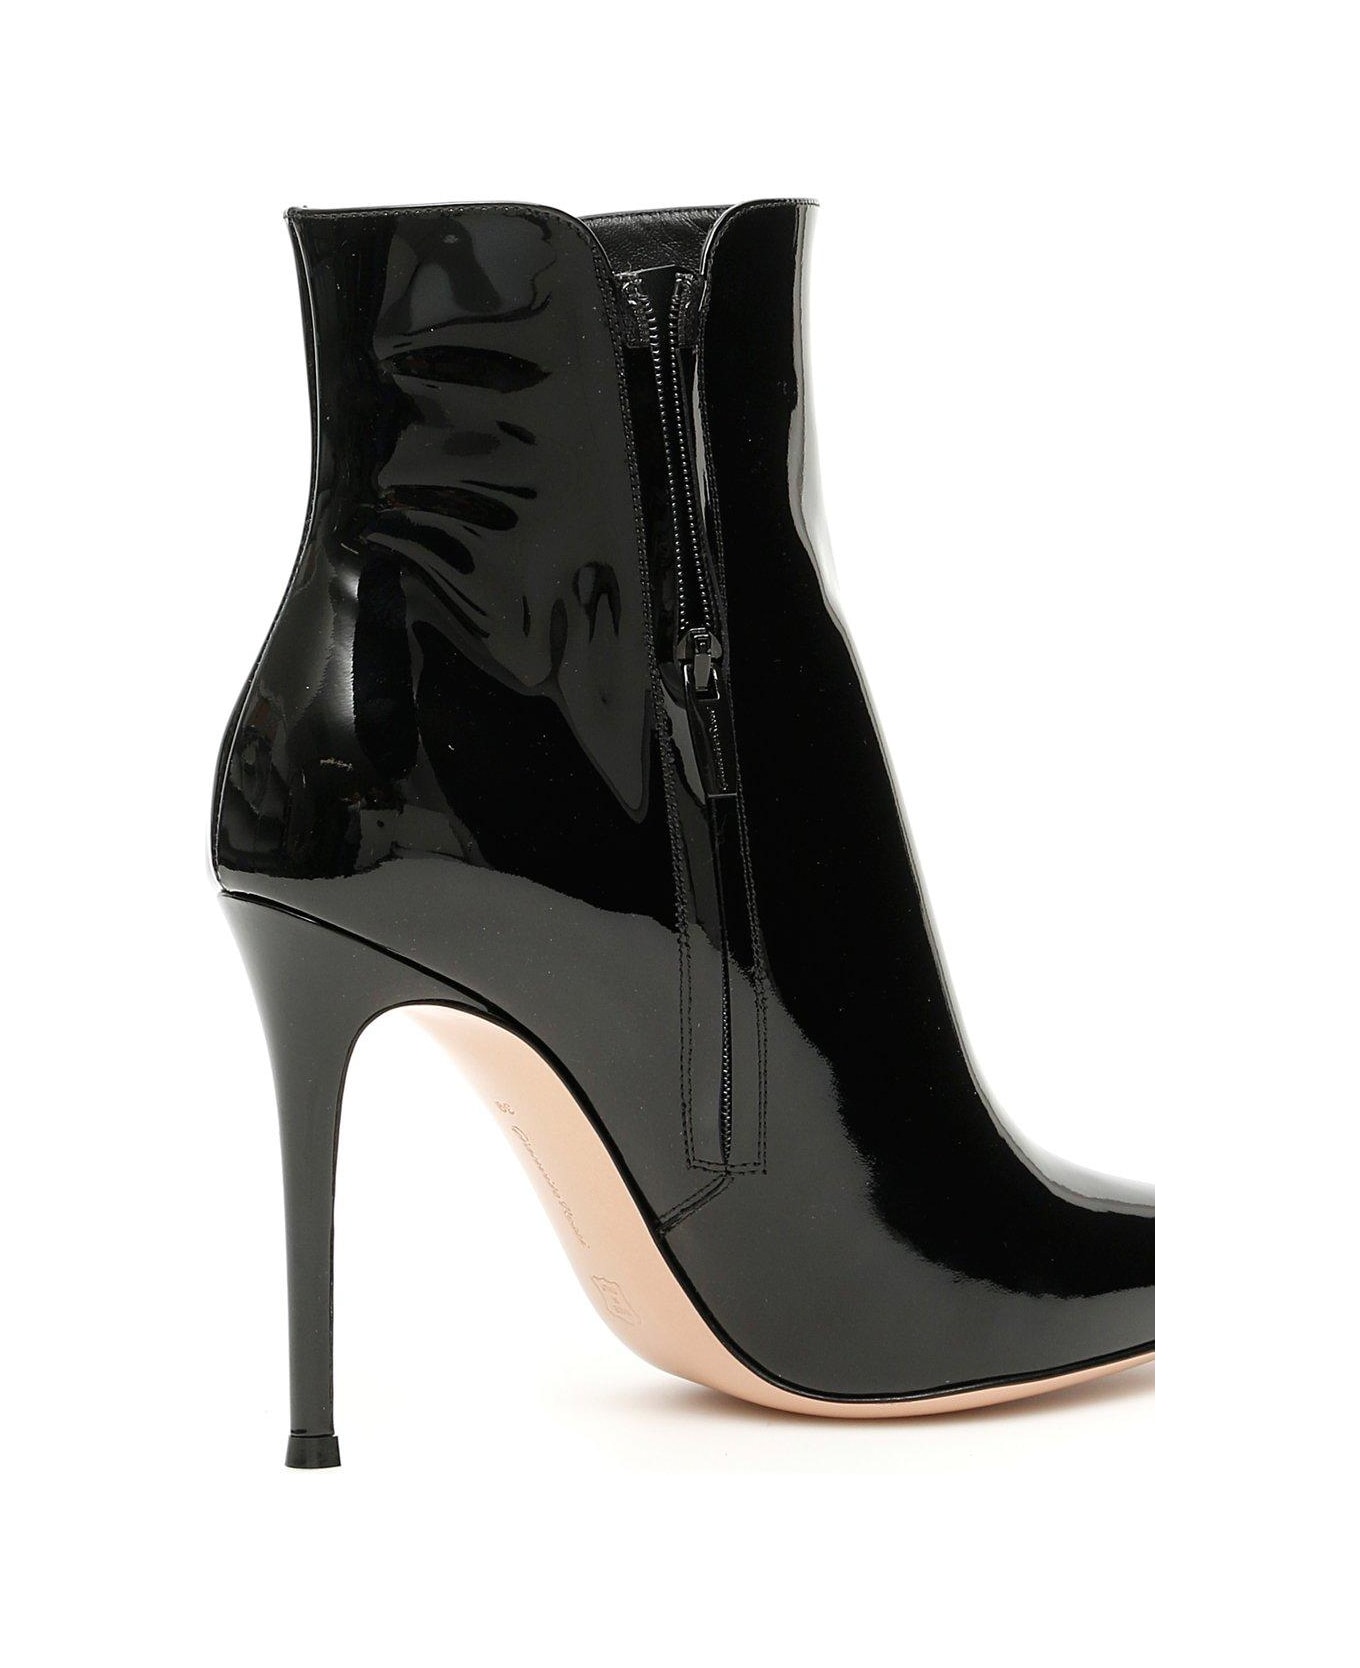 Gianvito Rossi Levy Zip-up Boots - Black ブーツ